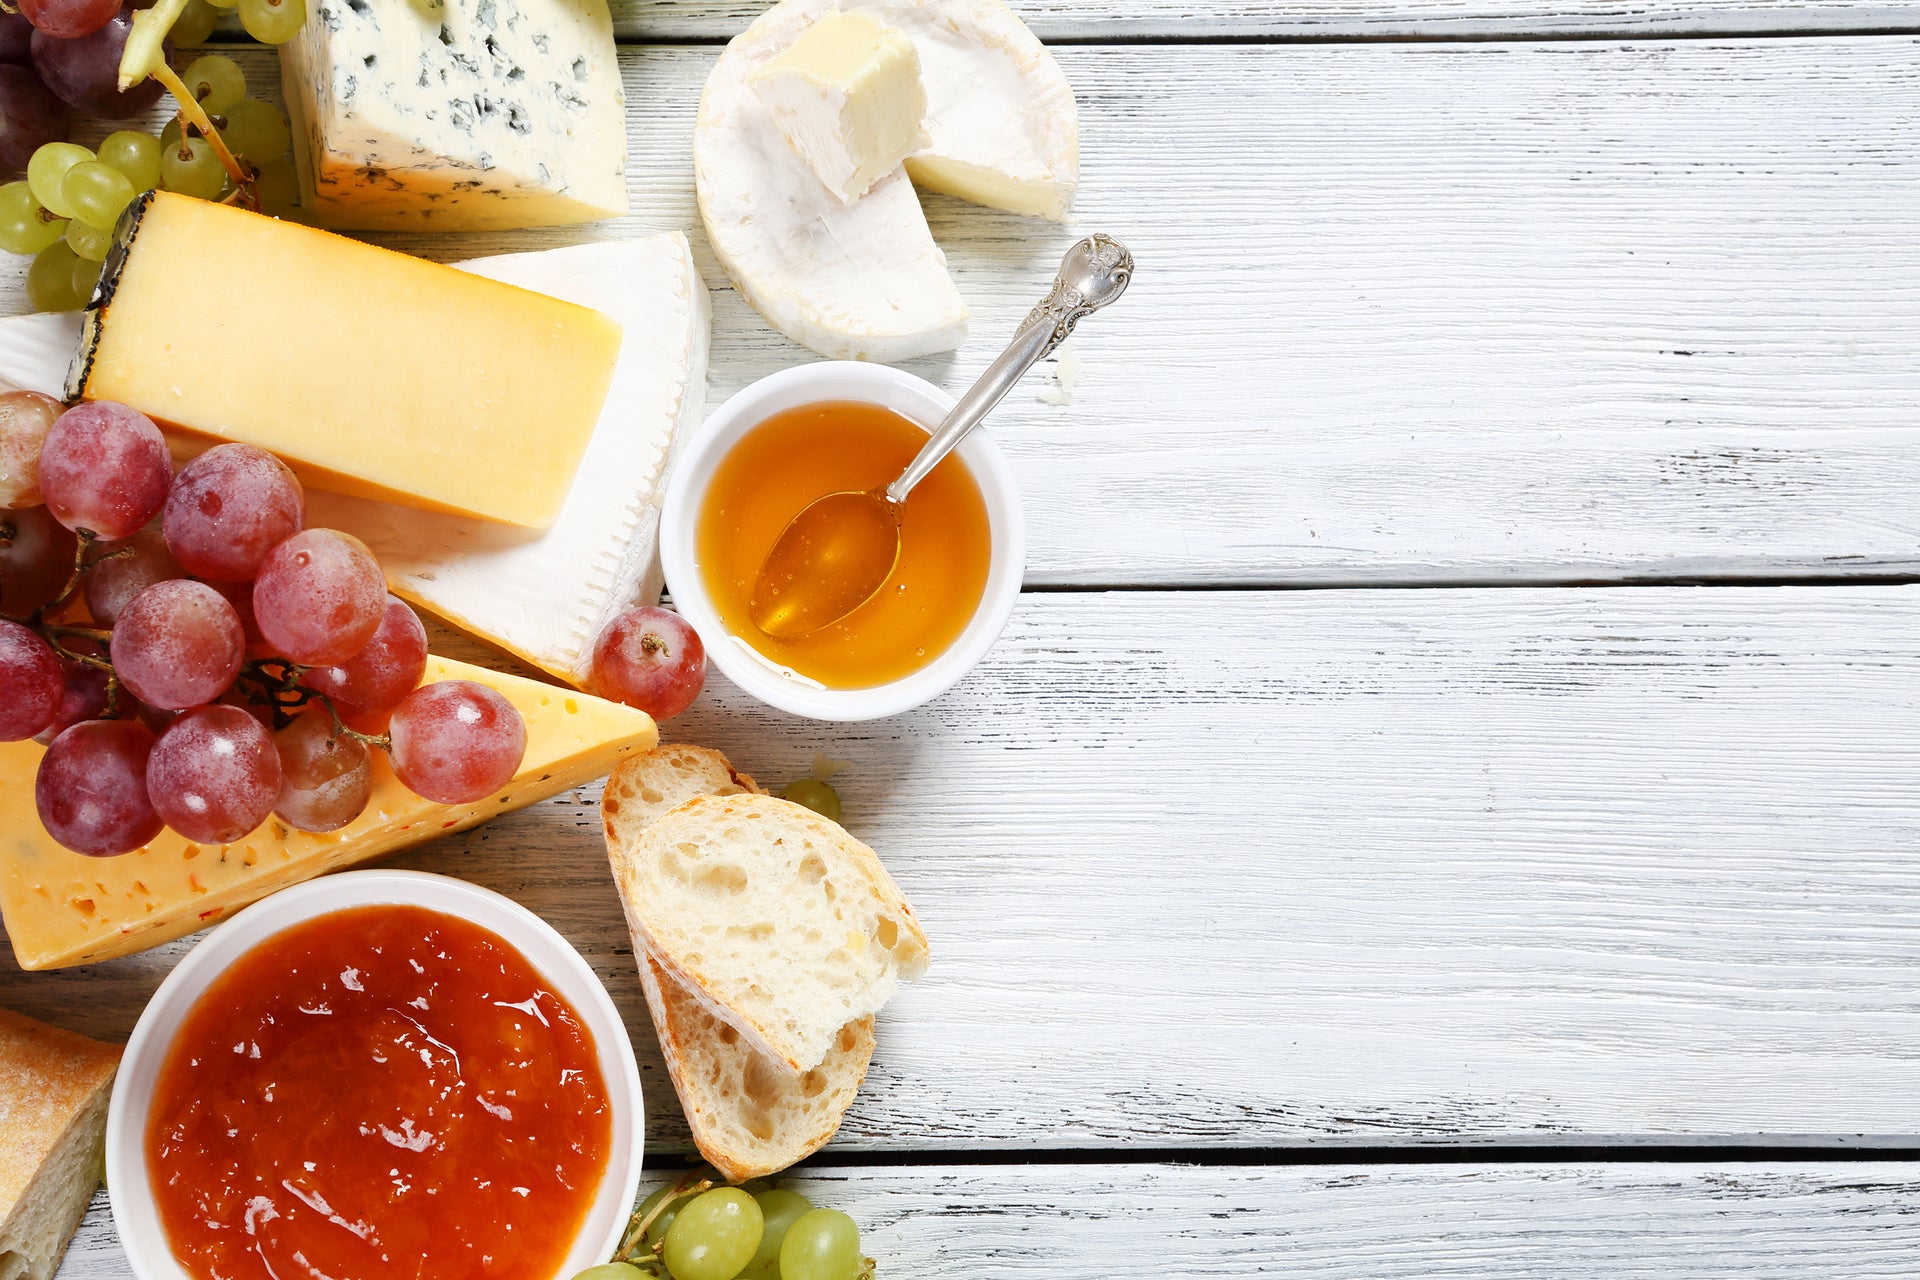 Perfecting the Art of Making a Winning  Cheese Board